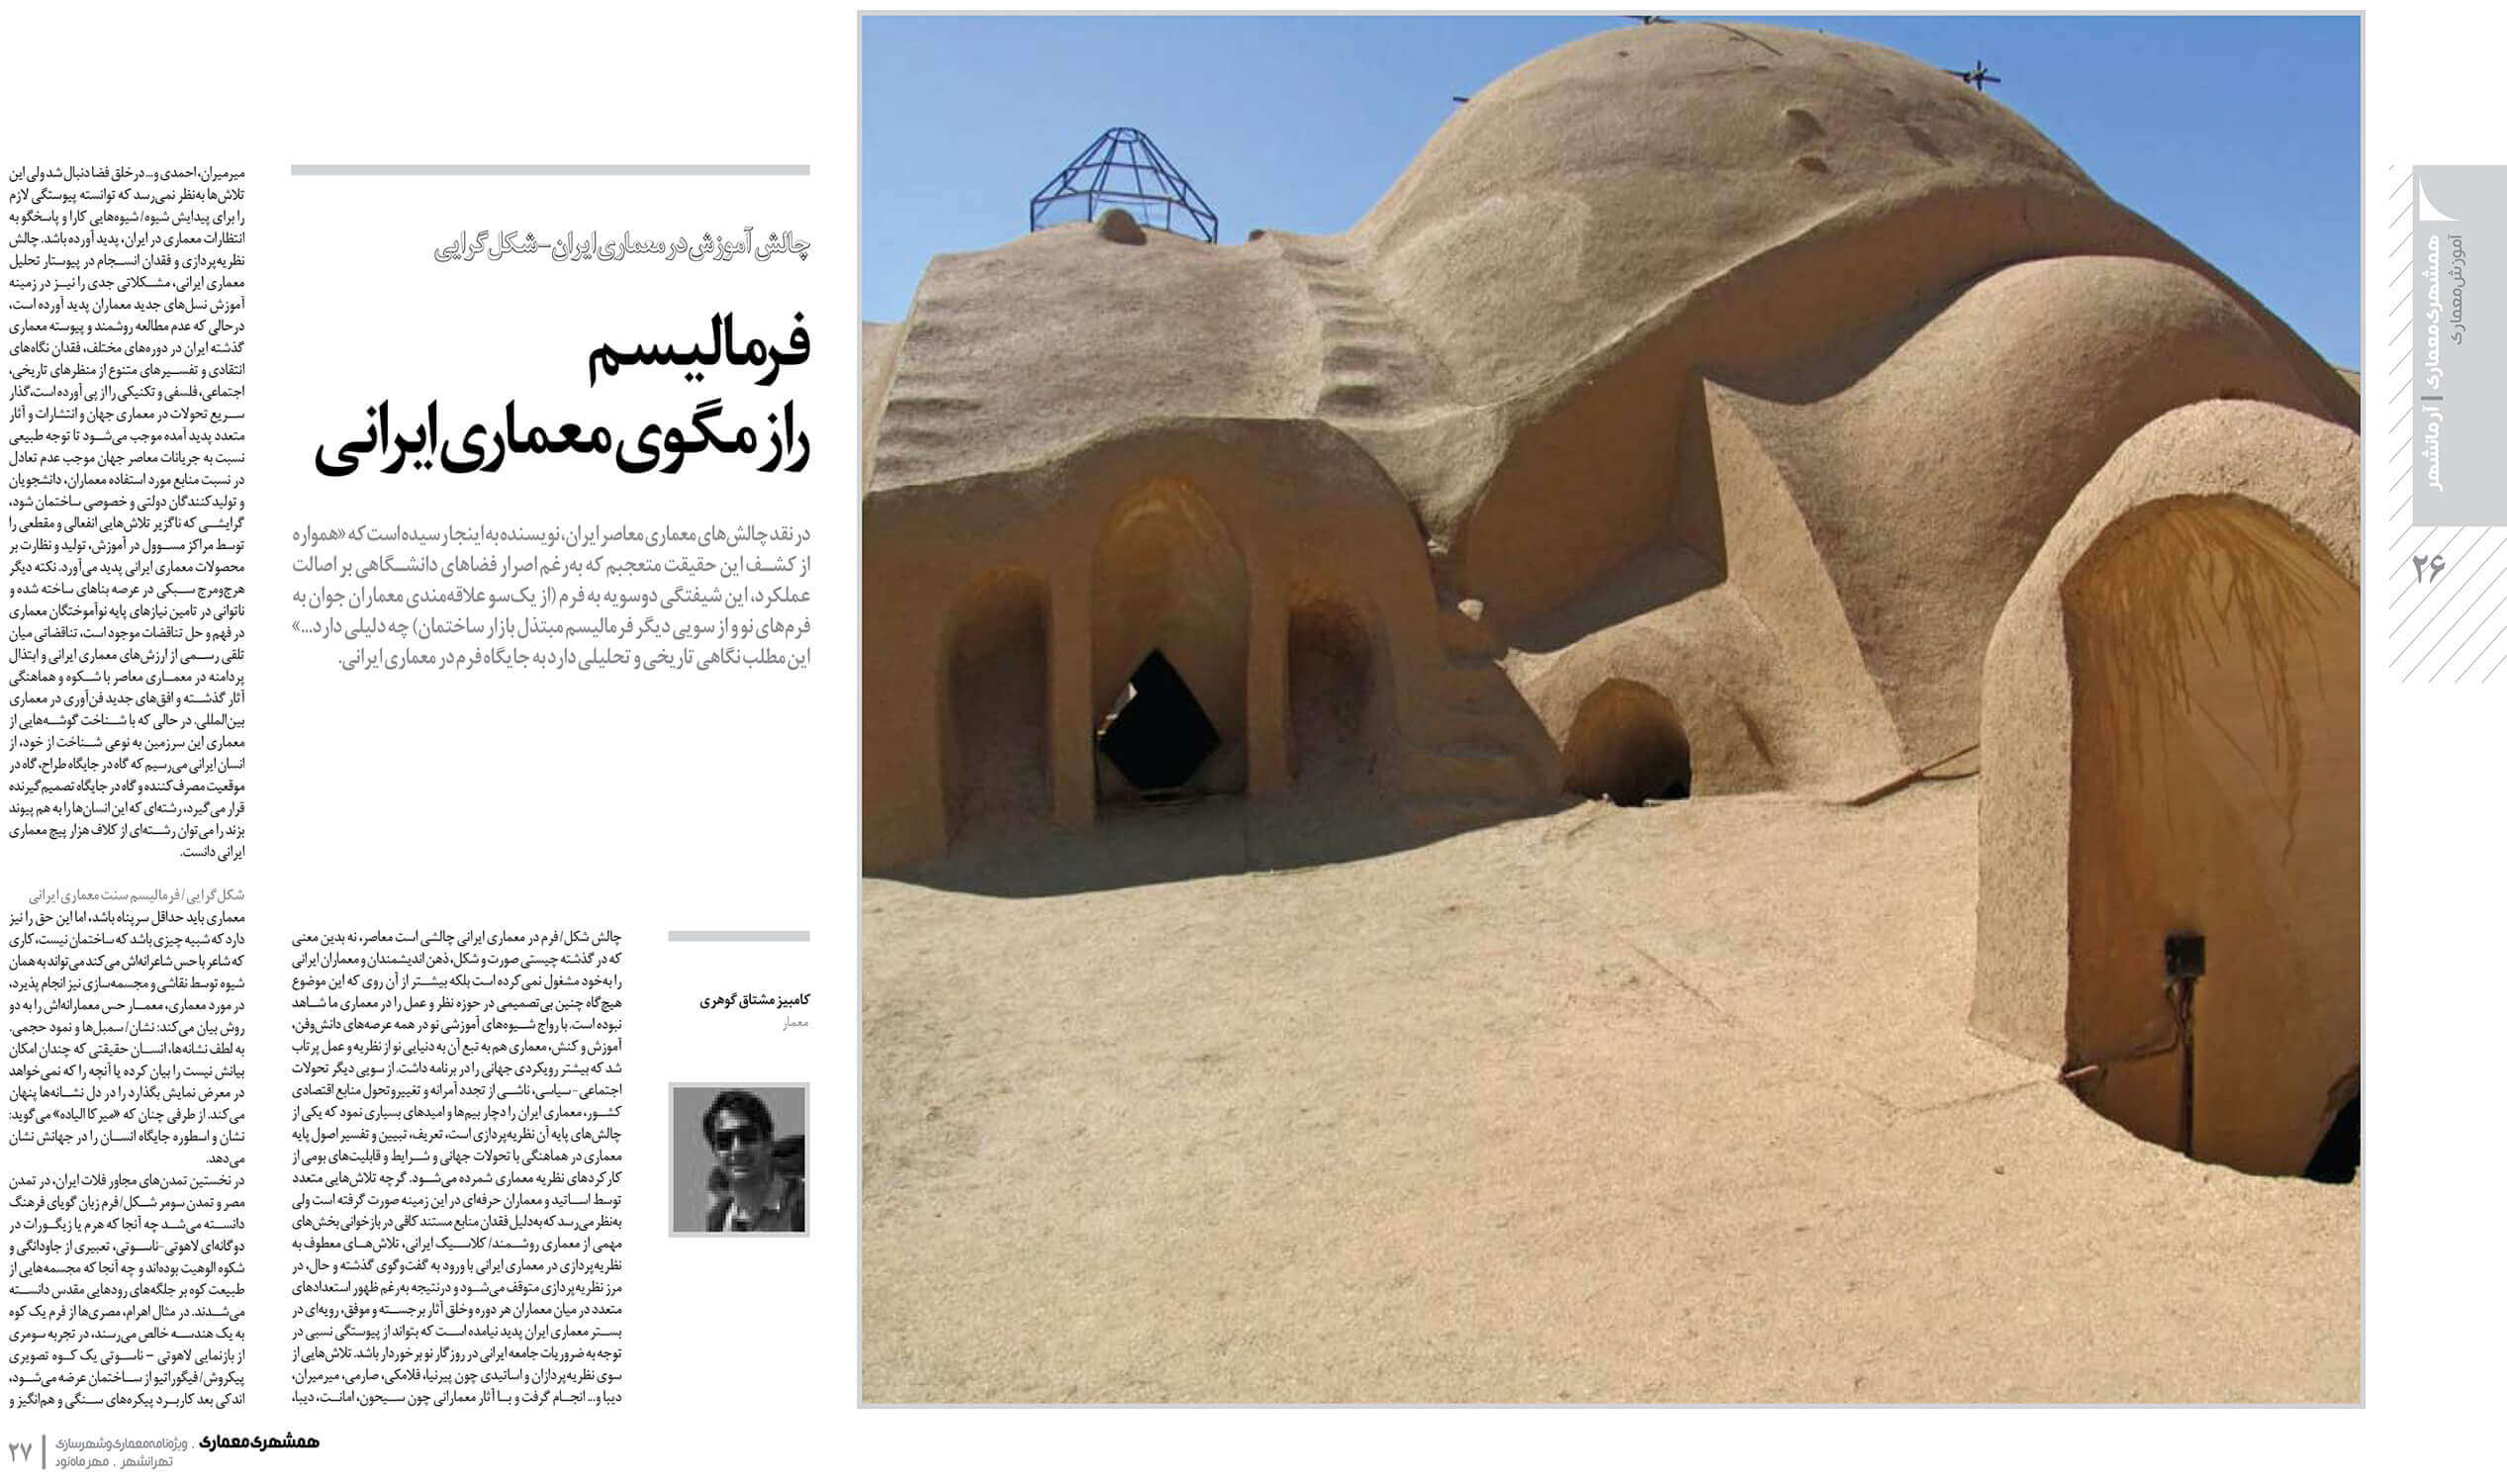 picture no. 2 of publication: Formalism The Mystery of Iranian Architecture, author: Kambiz Moshtaq